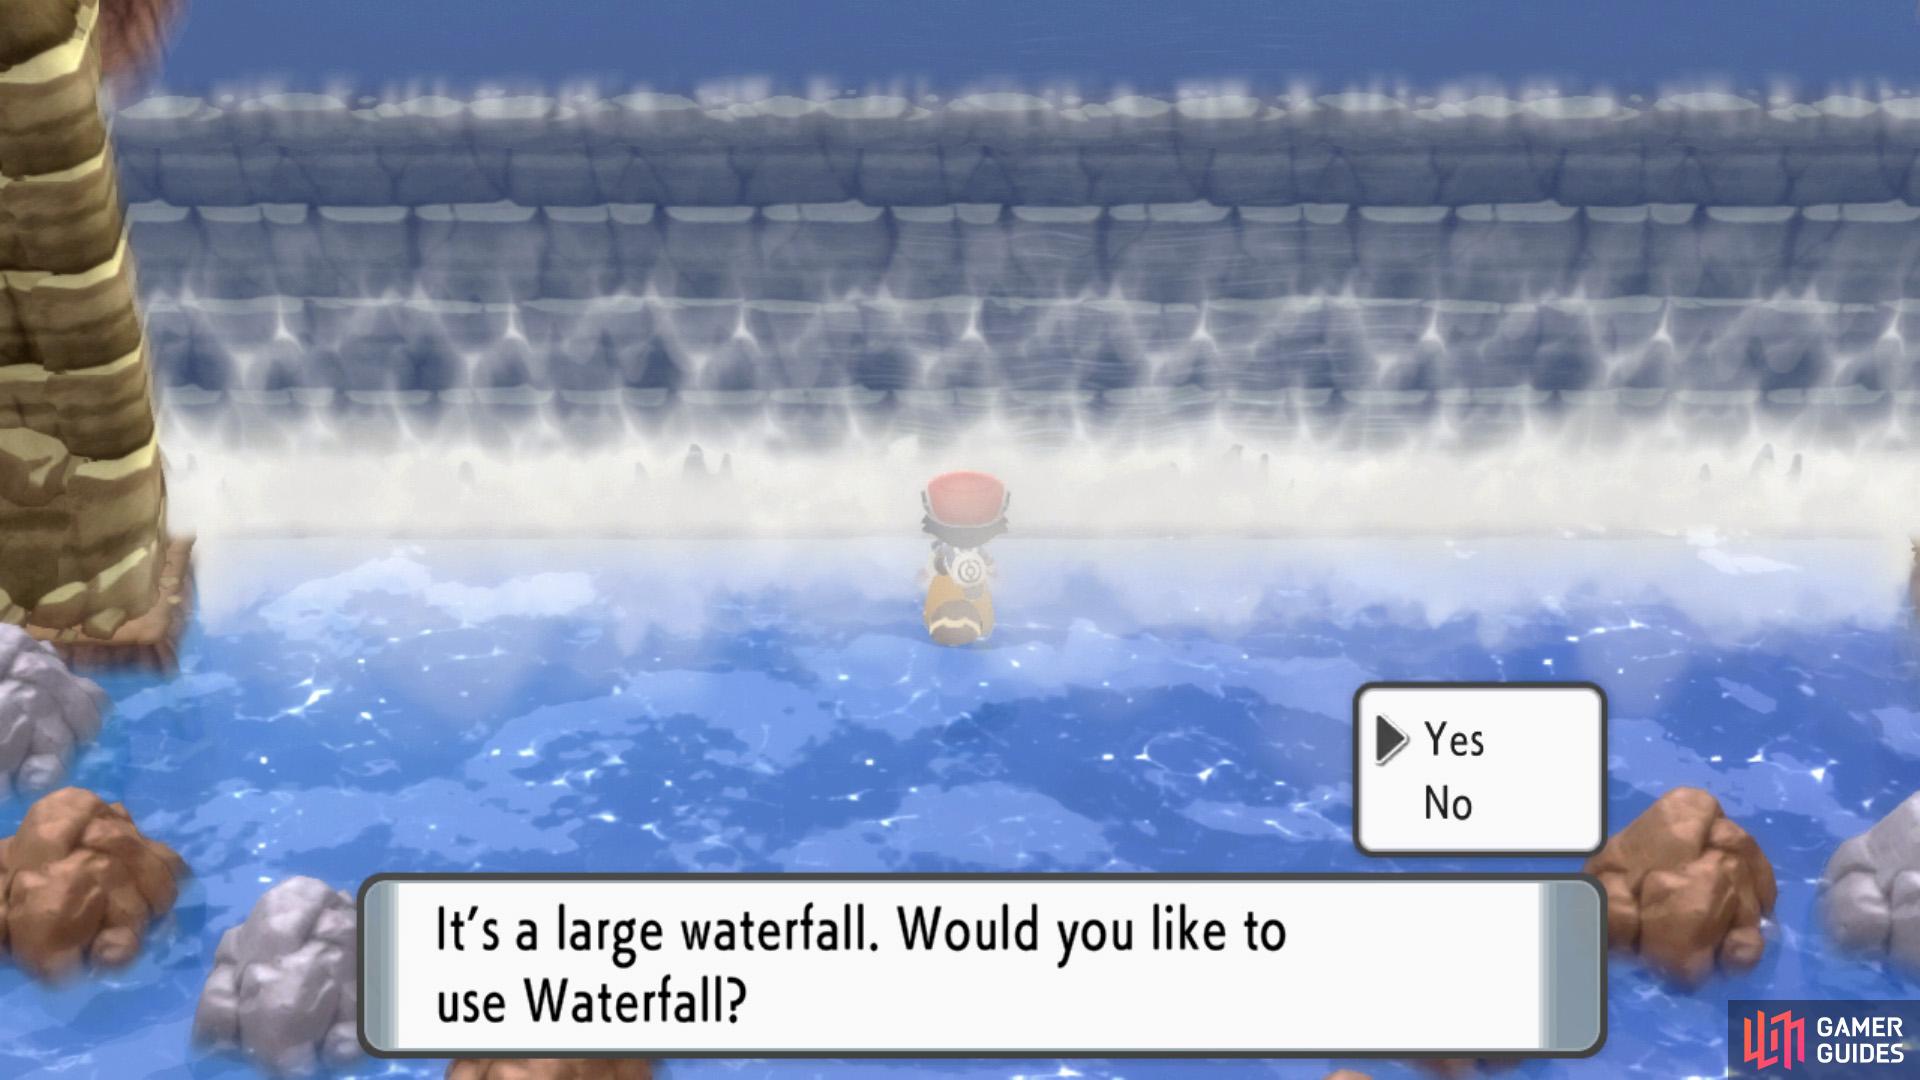 There aren't too many opportunities to use Waterfall…